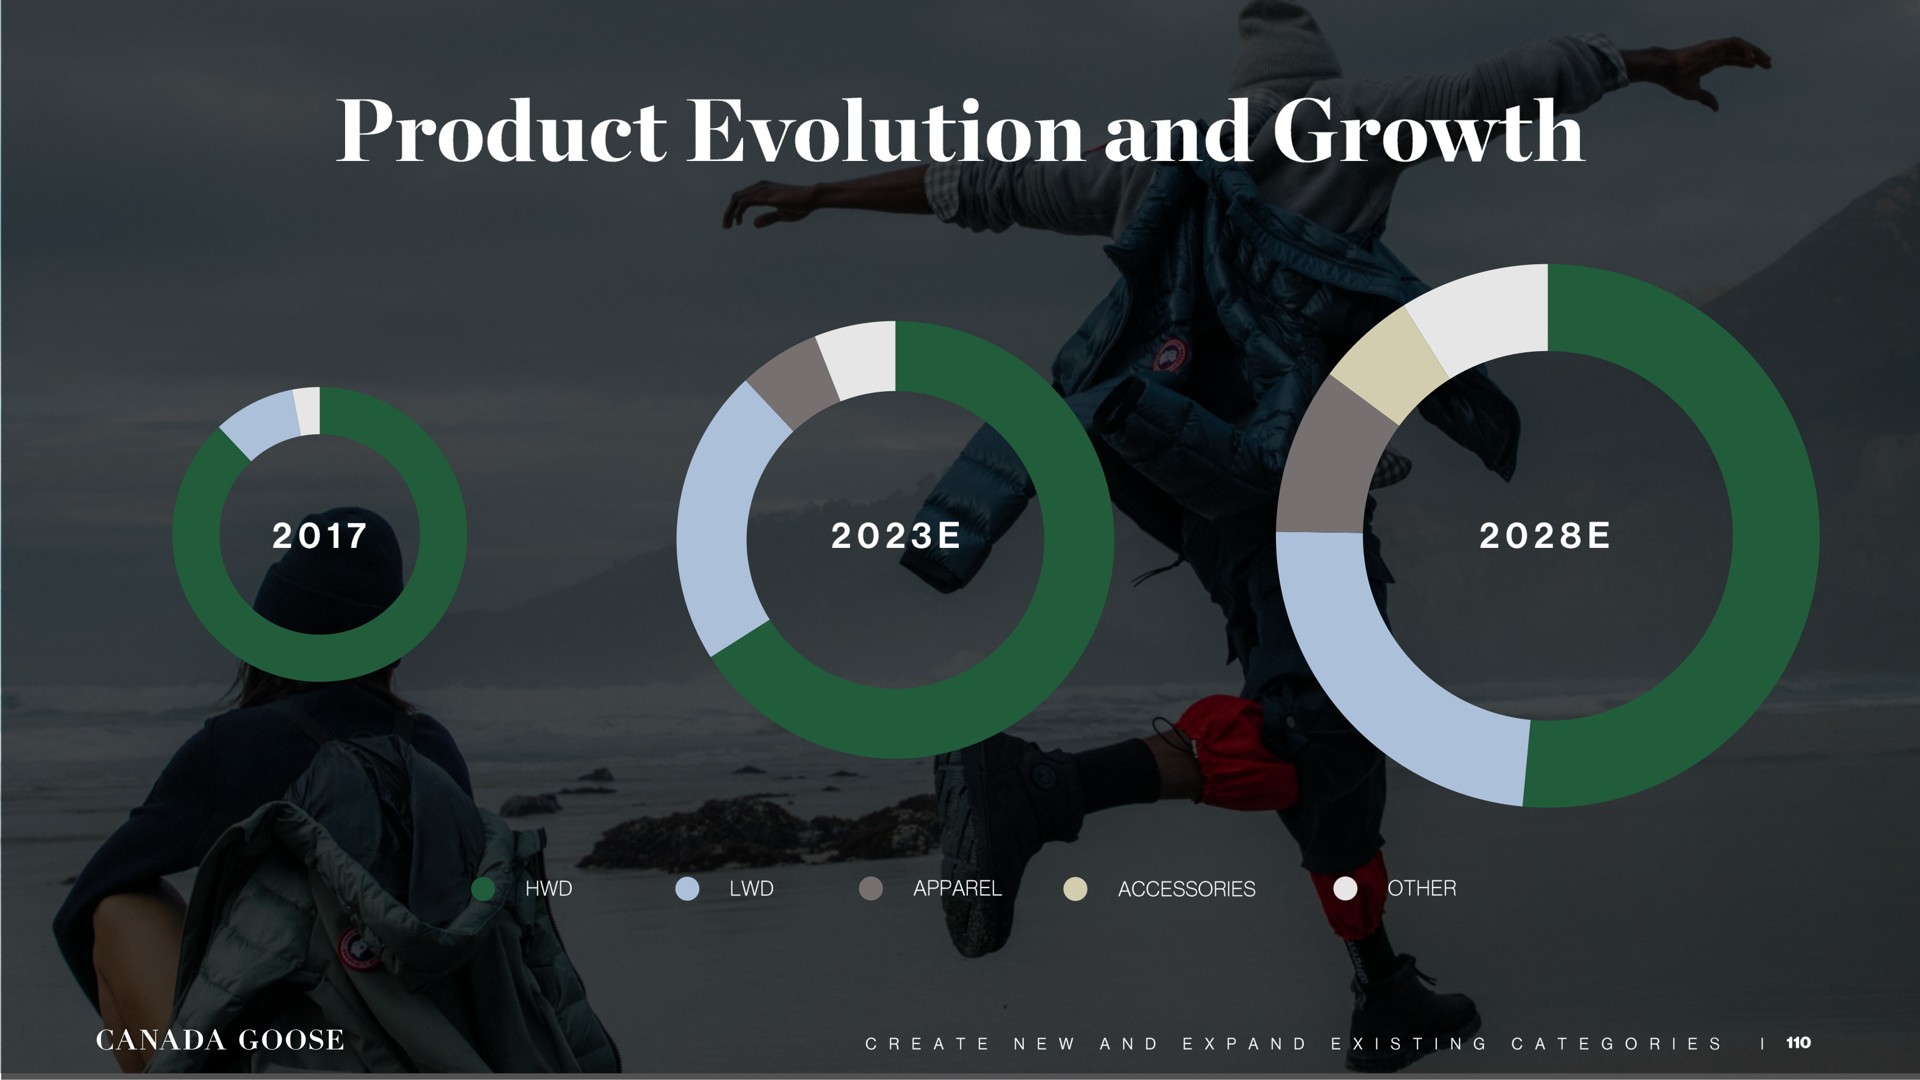 product evolution and growth apparel accessories other canada goose create new and expand categories | Canada Goose